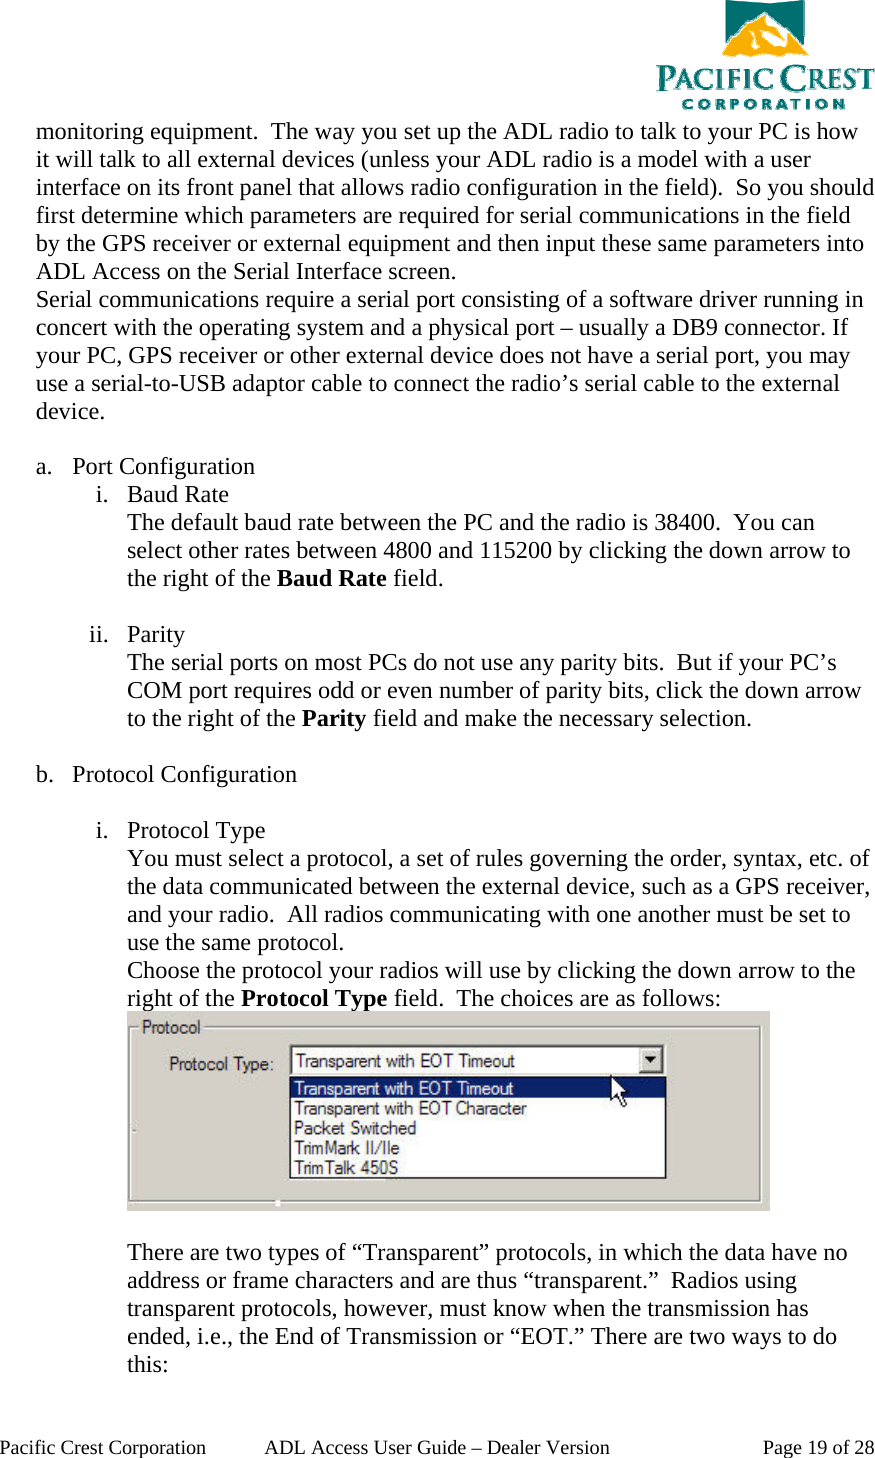  Pacific Crest Corporation  ADL Access User Guide – Dealer Version  Page 19 of 28 monitoring equipment.  The way you set up the ADL radio to talk to your PC is how it will talk to all external devices (unless your ADL radio is a model with a user interface on its front panel that allows radio configuration in the field).  So you should first determine which parameters are required for serial communications in the field by the GPS receiver or external equipment and then input these same parameters into ADL Access on the Serial Interface screen.  Serial communications require a serial port consisting of a software driver running in concert with the operating system and a physical port – usually a DB9 connector. If your PC, GPS receiver or other external device does not have a serial port, you may use a serial-to-USB adaptor cable to connect the radio’s serial cable to the external device.  a. Port Configuration i. Baud Rate The default baud rate between the PC and the radio is 38400.  You can select other rates between 4800 and 115200 by clicking the down arrow to the right of the Baud Rate field.  ii. Parity The serial ports on most PCs do not use any parity bits.  But if your PC’s COM port requires odd or even number of parity bits, click the down arrow to the right of the Parity field and make the necessary selection.  b. Protocol Configuration   i. Protocol Type You must select a protocol, a set of rules governing the order, syntax, etc. of the data communicated between the external device, such as a GPS receiver, and your radio.  All radios communicating with one another must be set to use the same protocol. Choose the protocol your radios will use by clicking the down arrow to the right of the Protocol Type field.  The choices are as follows:   There are two types of “Transparent” protocols, in which the data have no address or frame characters and are thus “transparent.”  Radios using transparent protocols, however, must know when the transmission has ended, i.e., the End of Transmission or “EOT.” There are two ways to do this: 